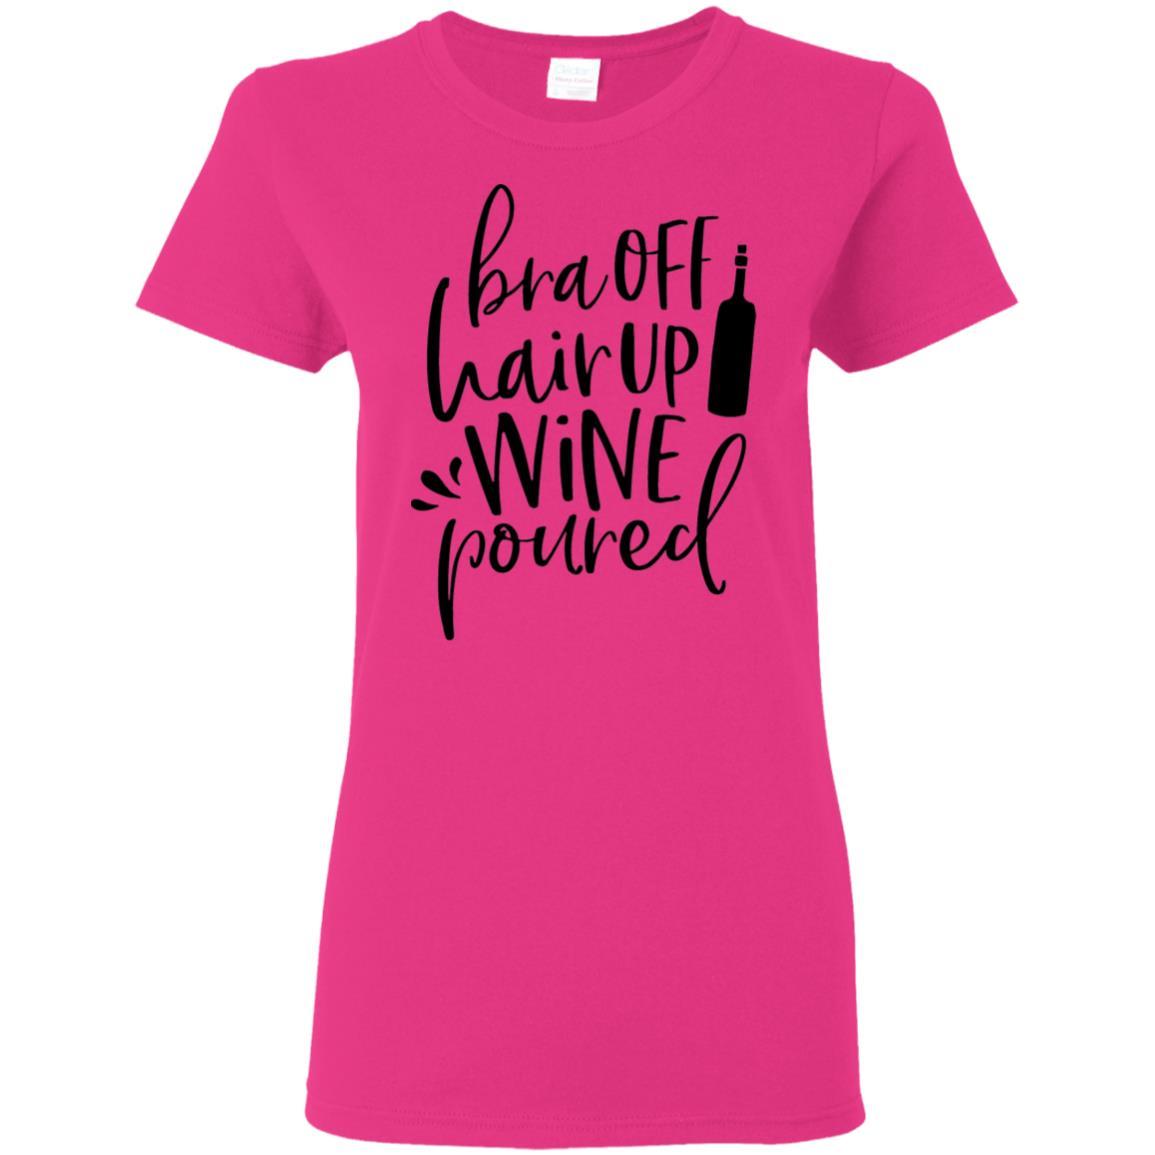 T-Shirts Heliconia / S WineyBitches.Co Bra Off Hair Up Wine Poured Ladies' 5.3 oz. T-Shirt (Blk Lettering) WineyBitchesCo